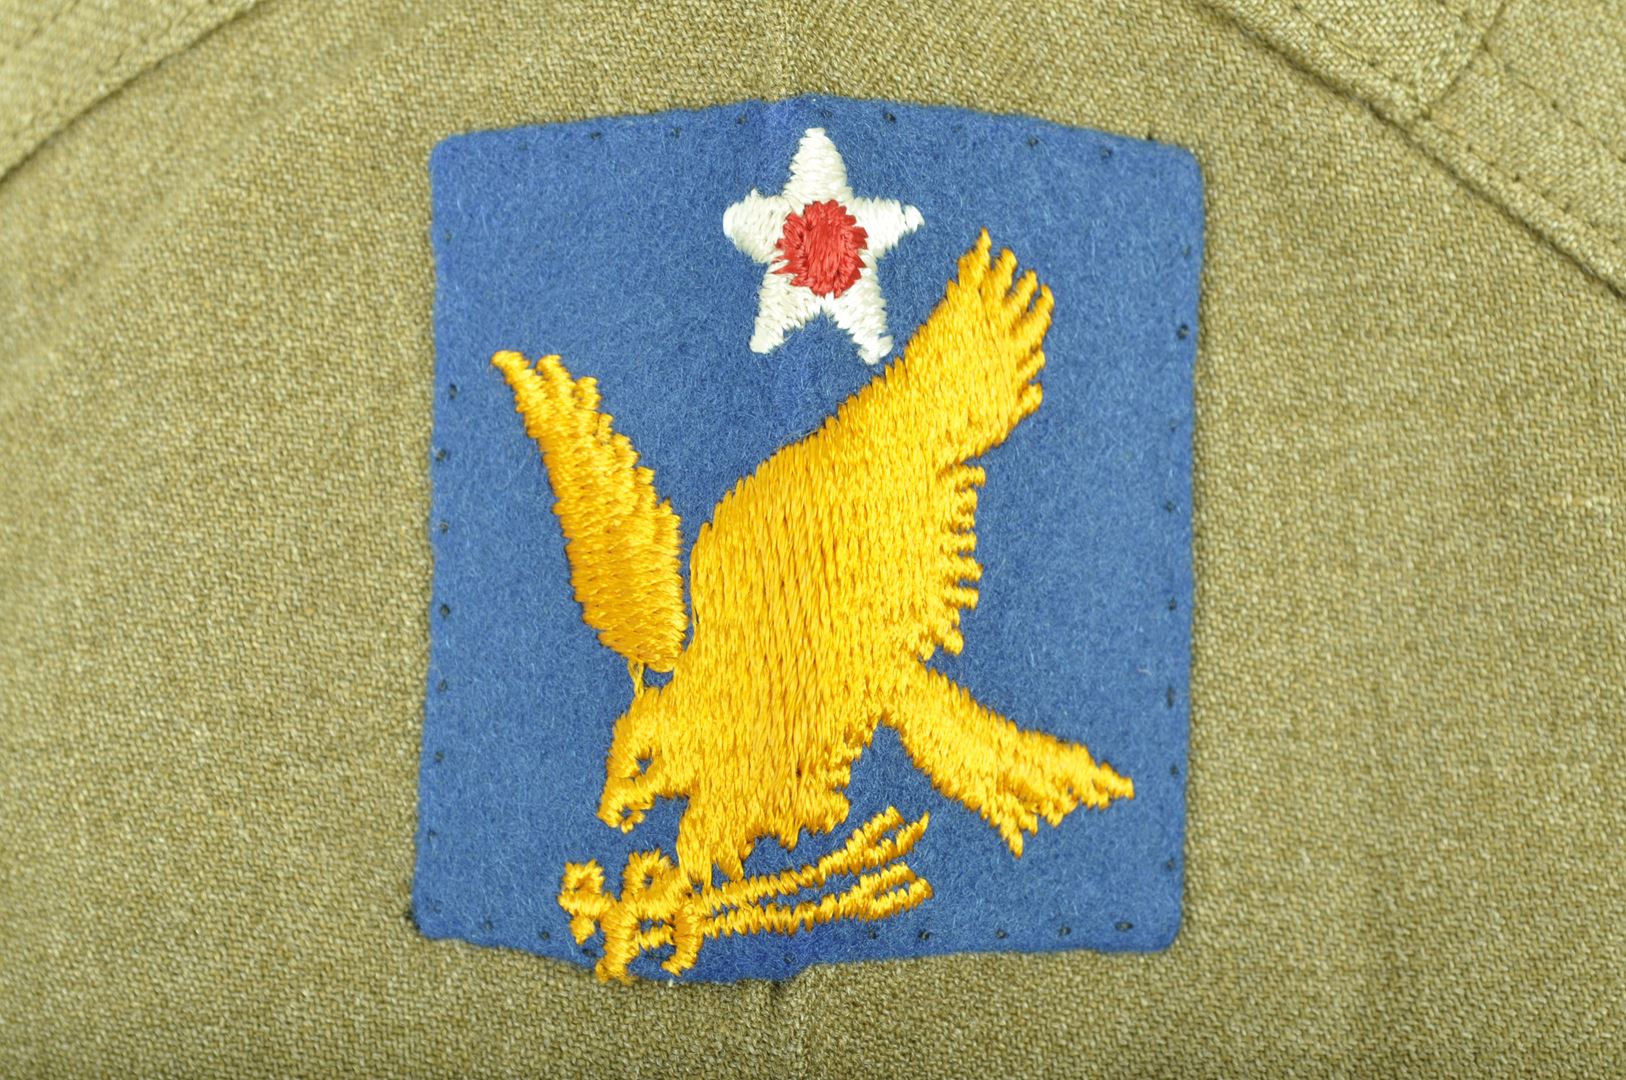 Chemise "moutarde" Nominative / Patch 2nd Army Air Force